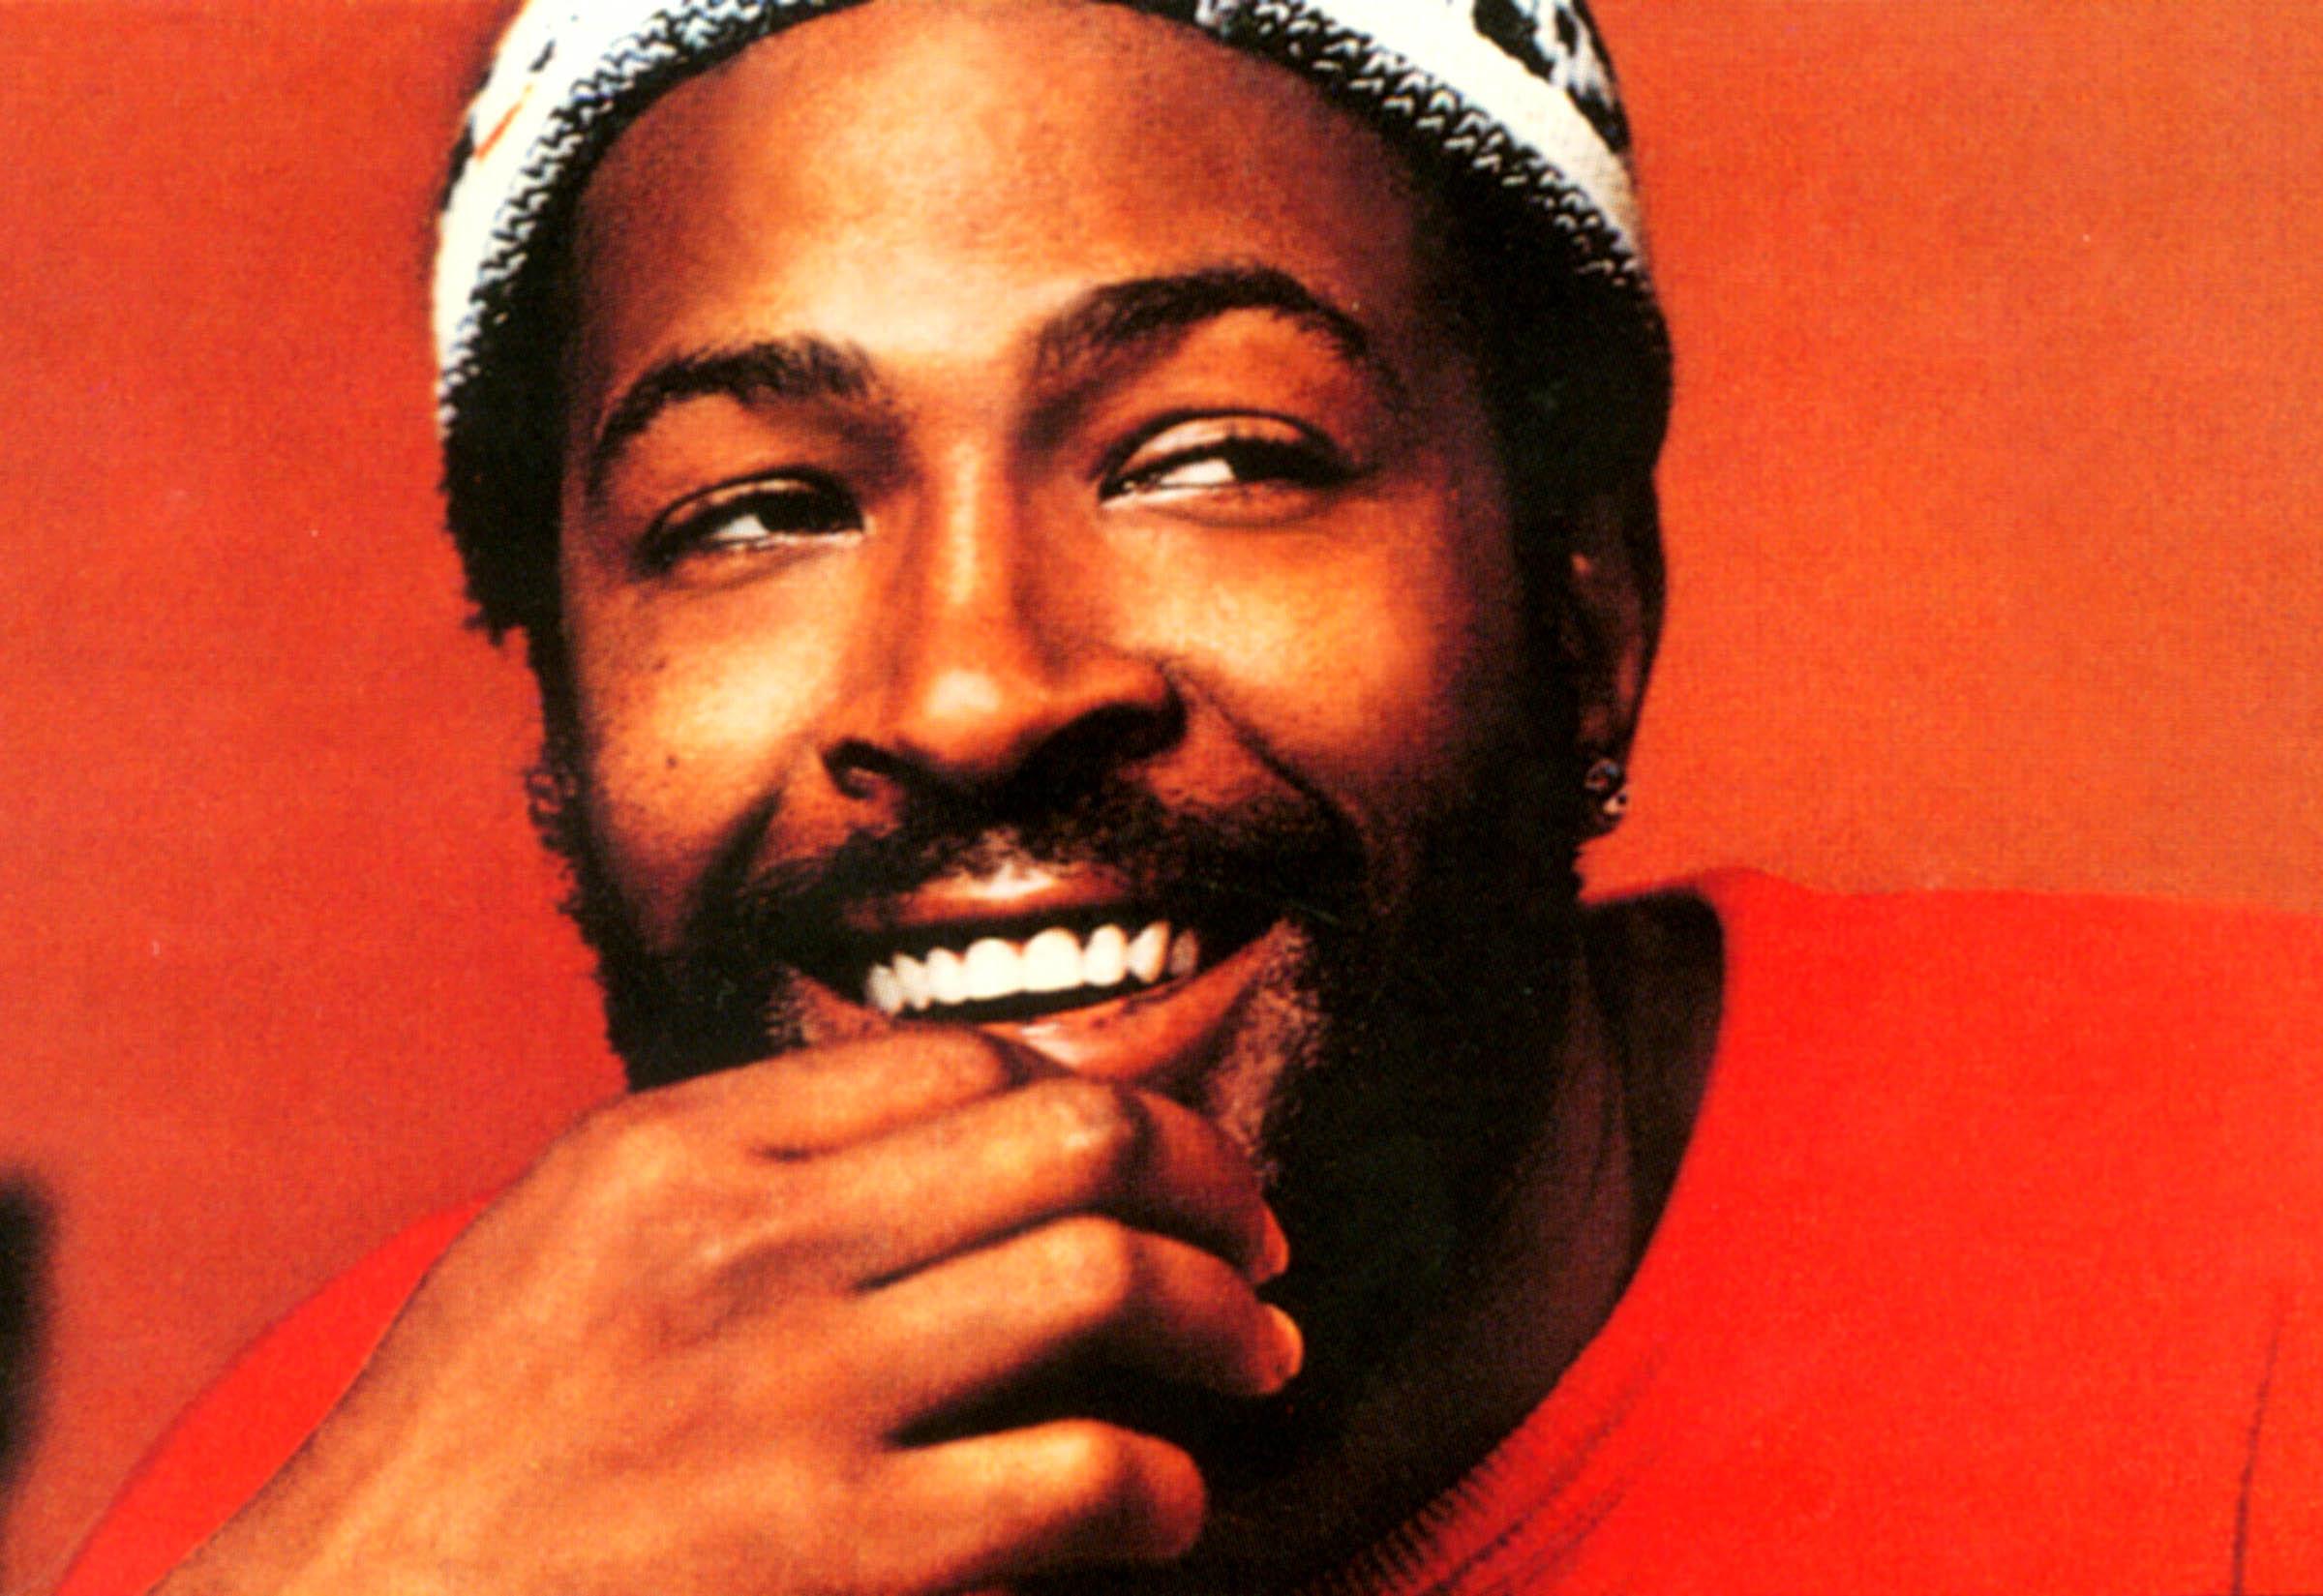 Wallpapers Of The Day: Marvin Gaye.